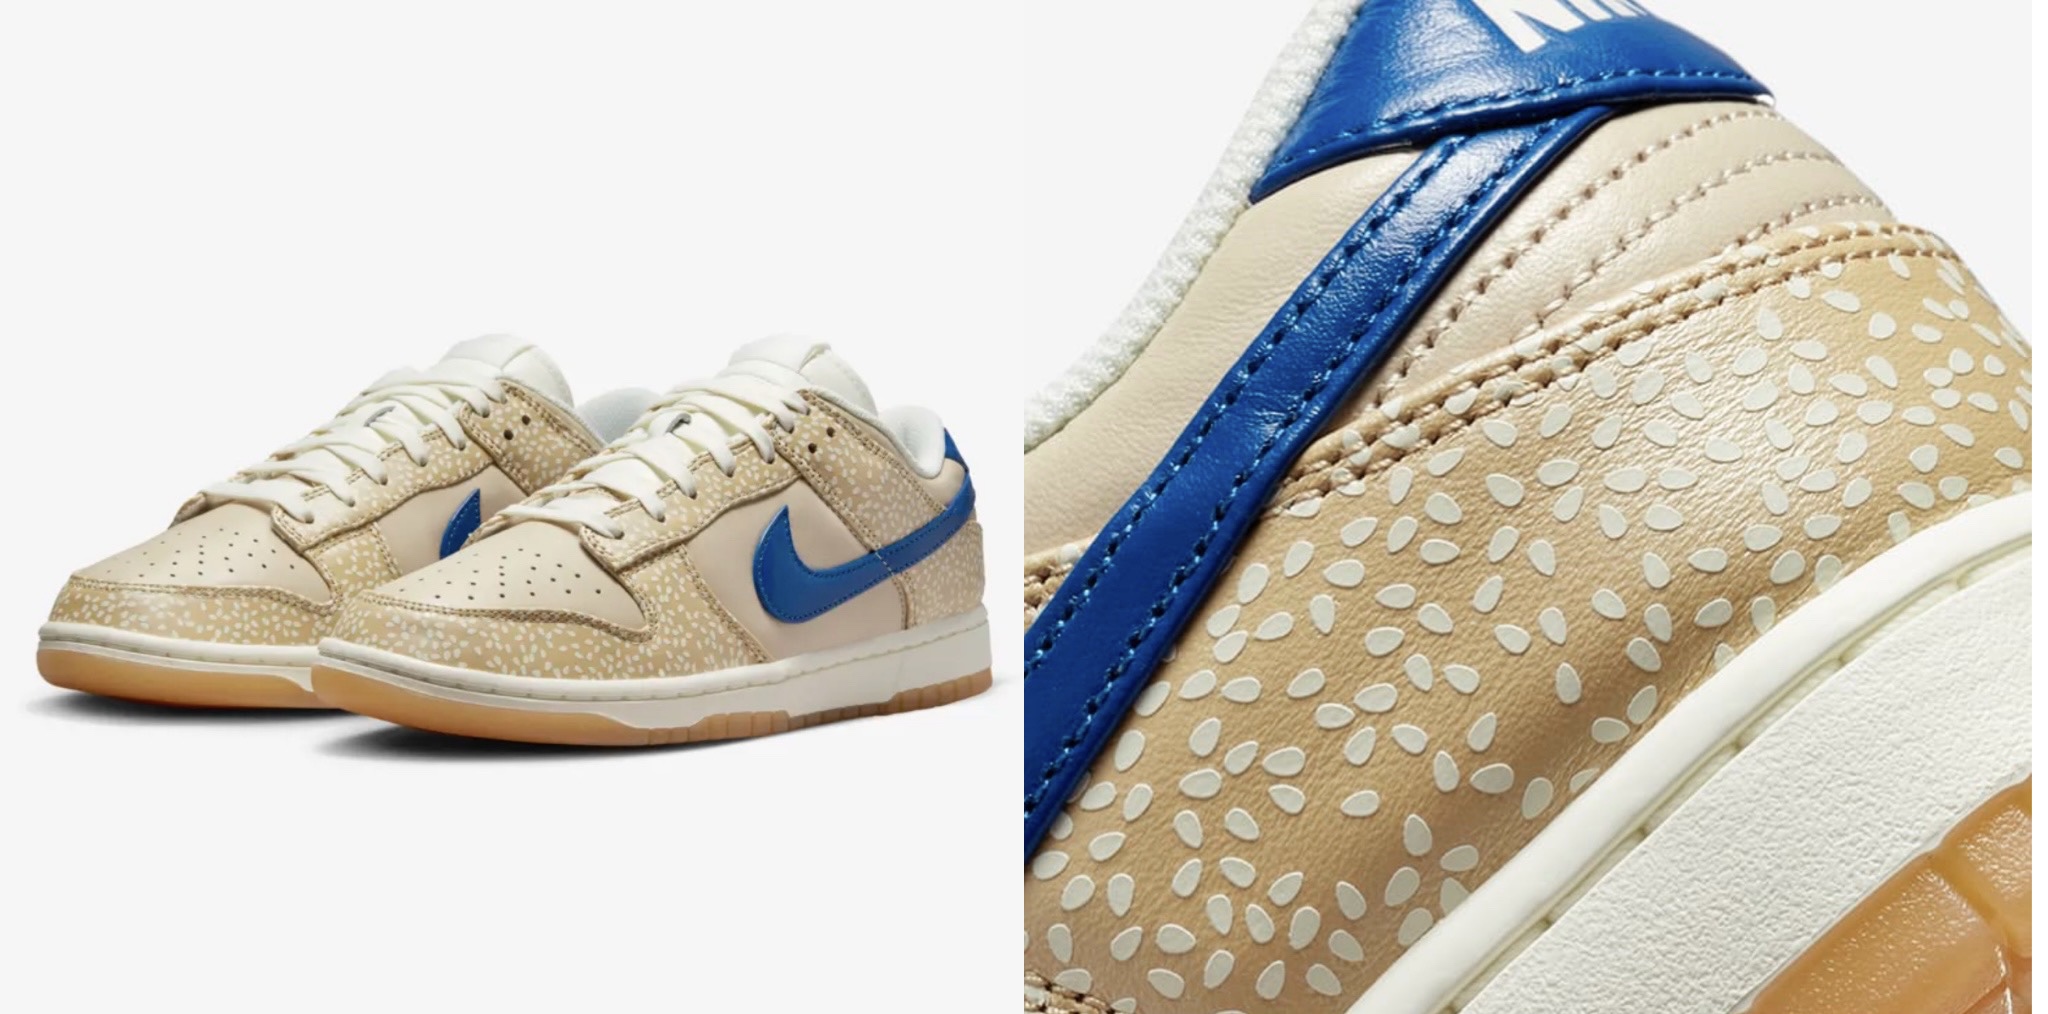 Nike Montreal Bagel Dunk Low shoes